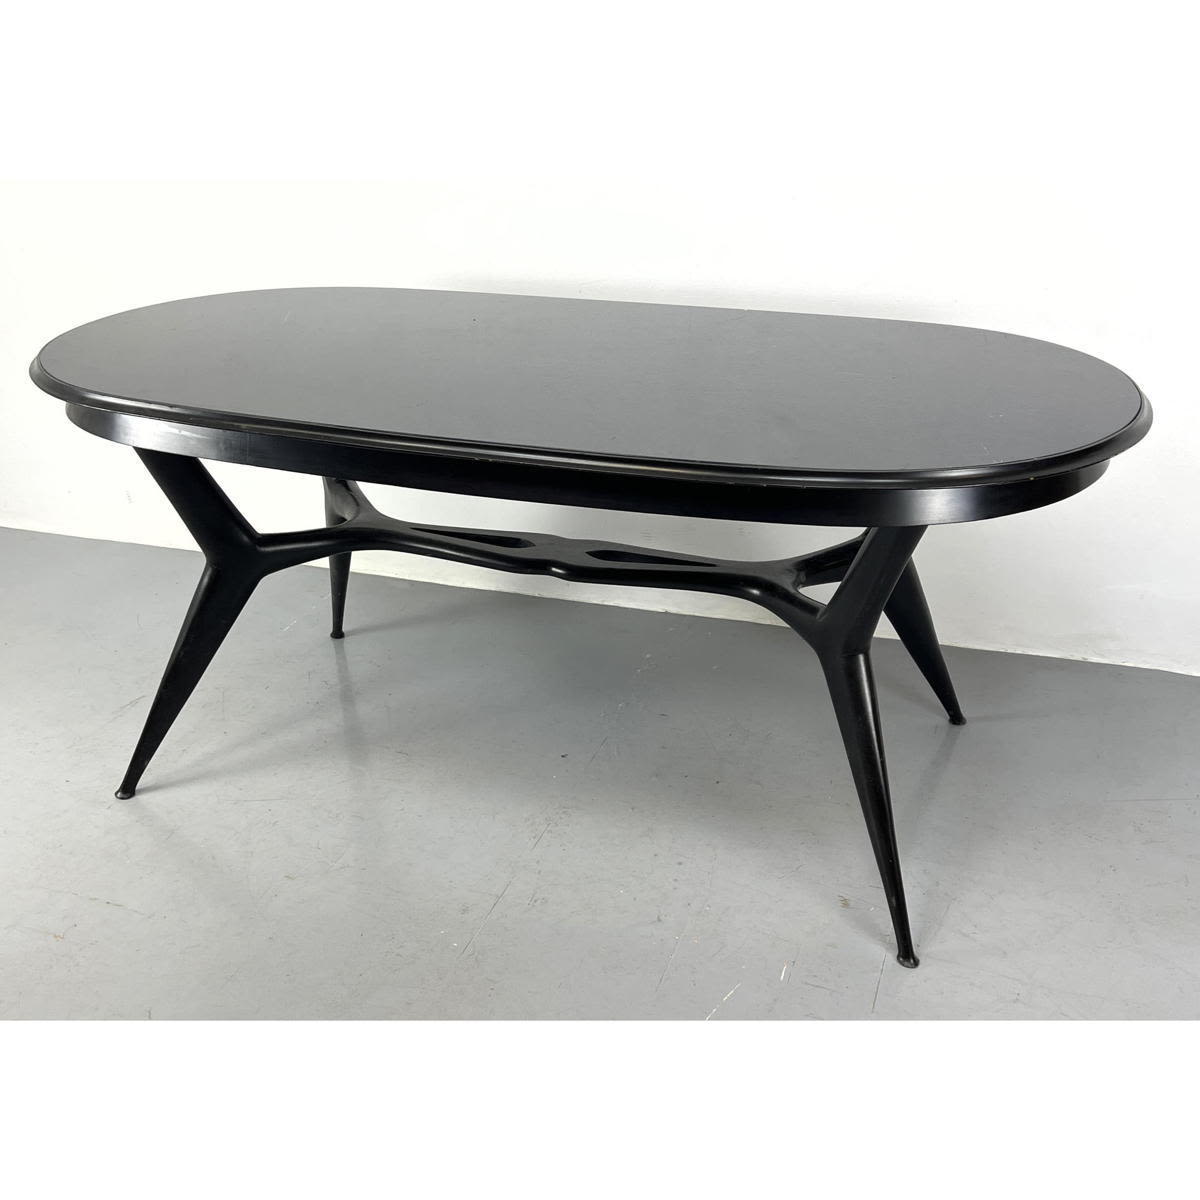 Italian dining table 1950 s dining 2a7671